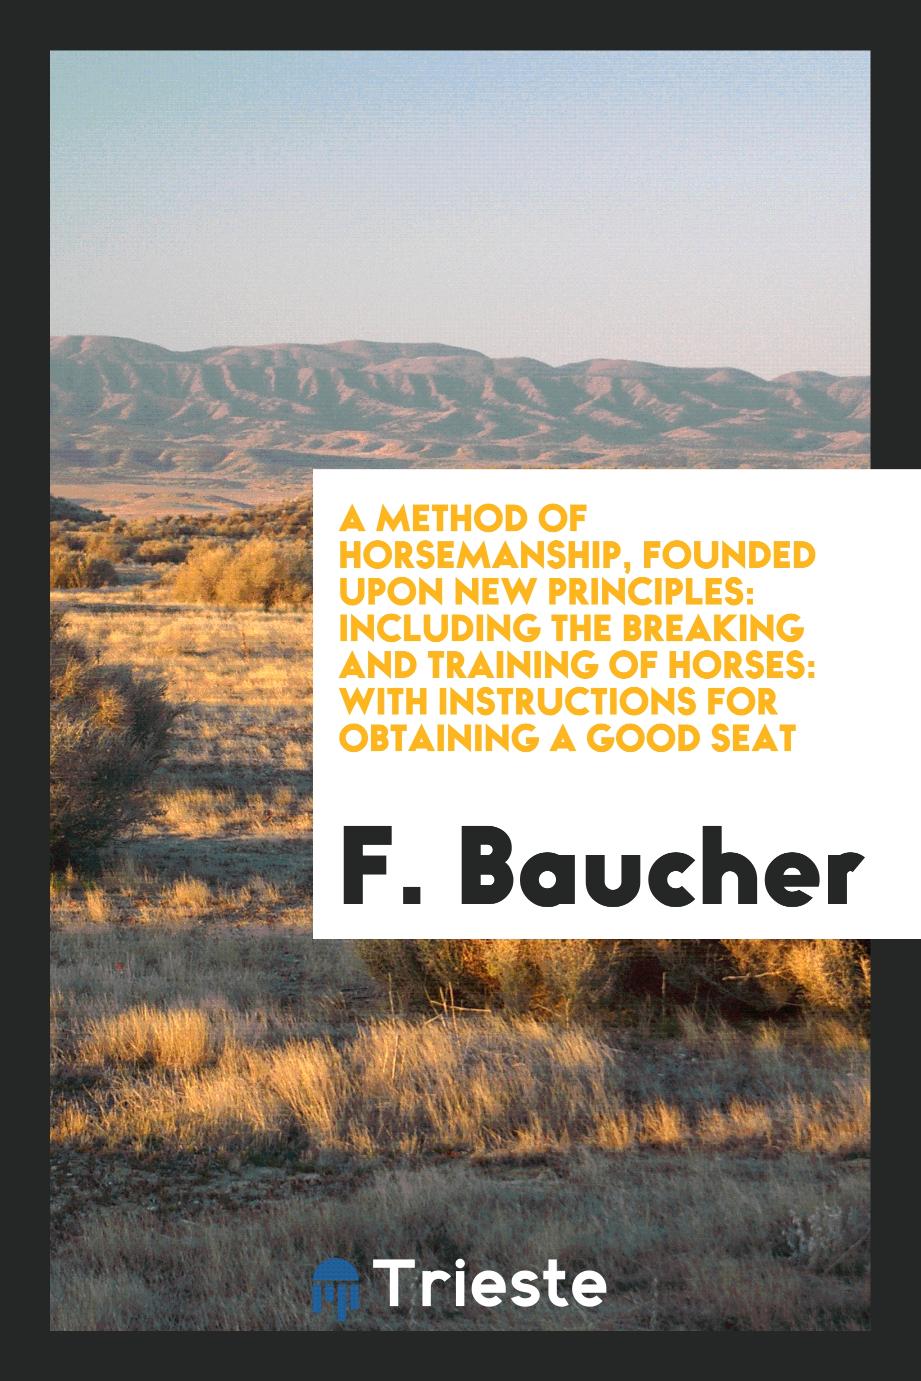 A Method of Horsemanship, Founded upon New Principles: Including the Breaking and Training of Horses: With Instructions for Obtaining a Good Seat